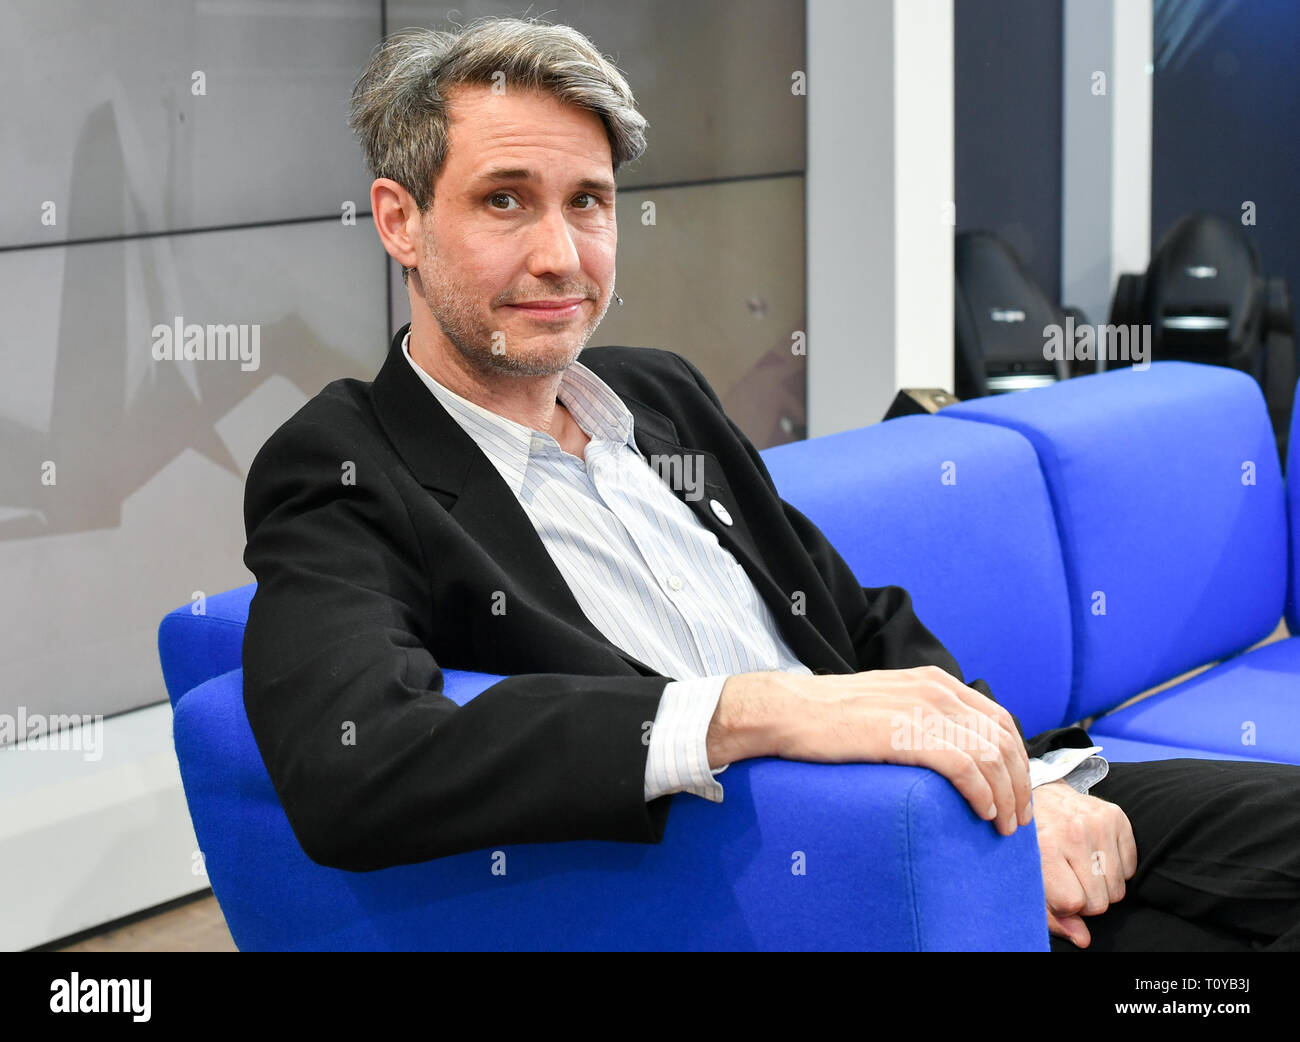 Leipzig, Germany. 22nd Mar, 2019. Dirk von Lowtzow, singer of the band Tocotronic, presents his book 'Aus dem Dachsbau' on the blue sofa. Until 24.03.2019 about 2600 exhibitors will present themselves on the exhibition grounds. At the same time the festival 'Leipzig reads' invites to numerous readings. The guest country of the Book Fair this year is the Czech Republic. Credit: Jens Kalaene/dpa-Zentralbild/dpa/Alamy Live News Stock Photo